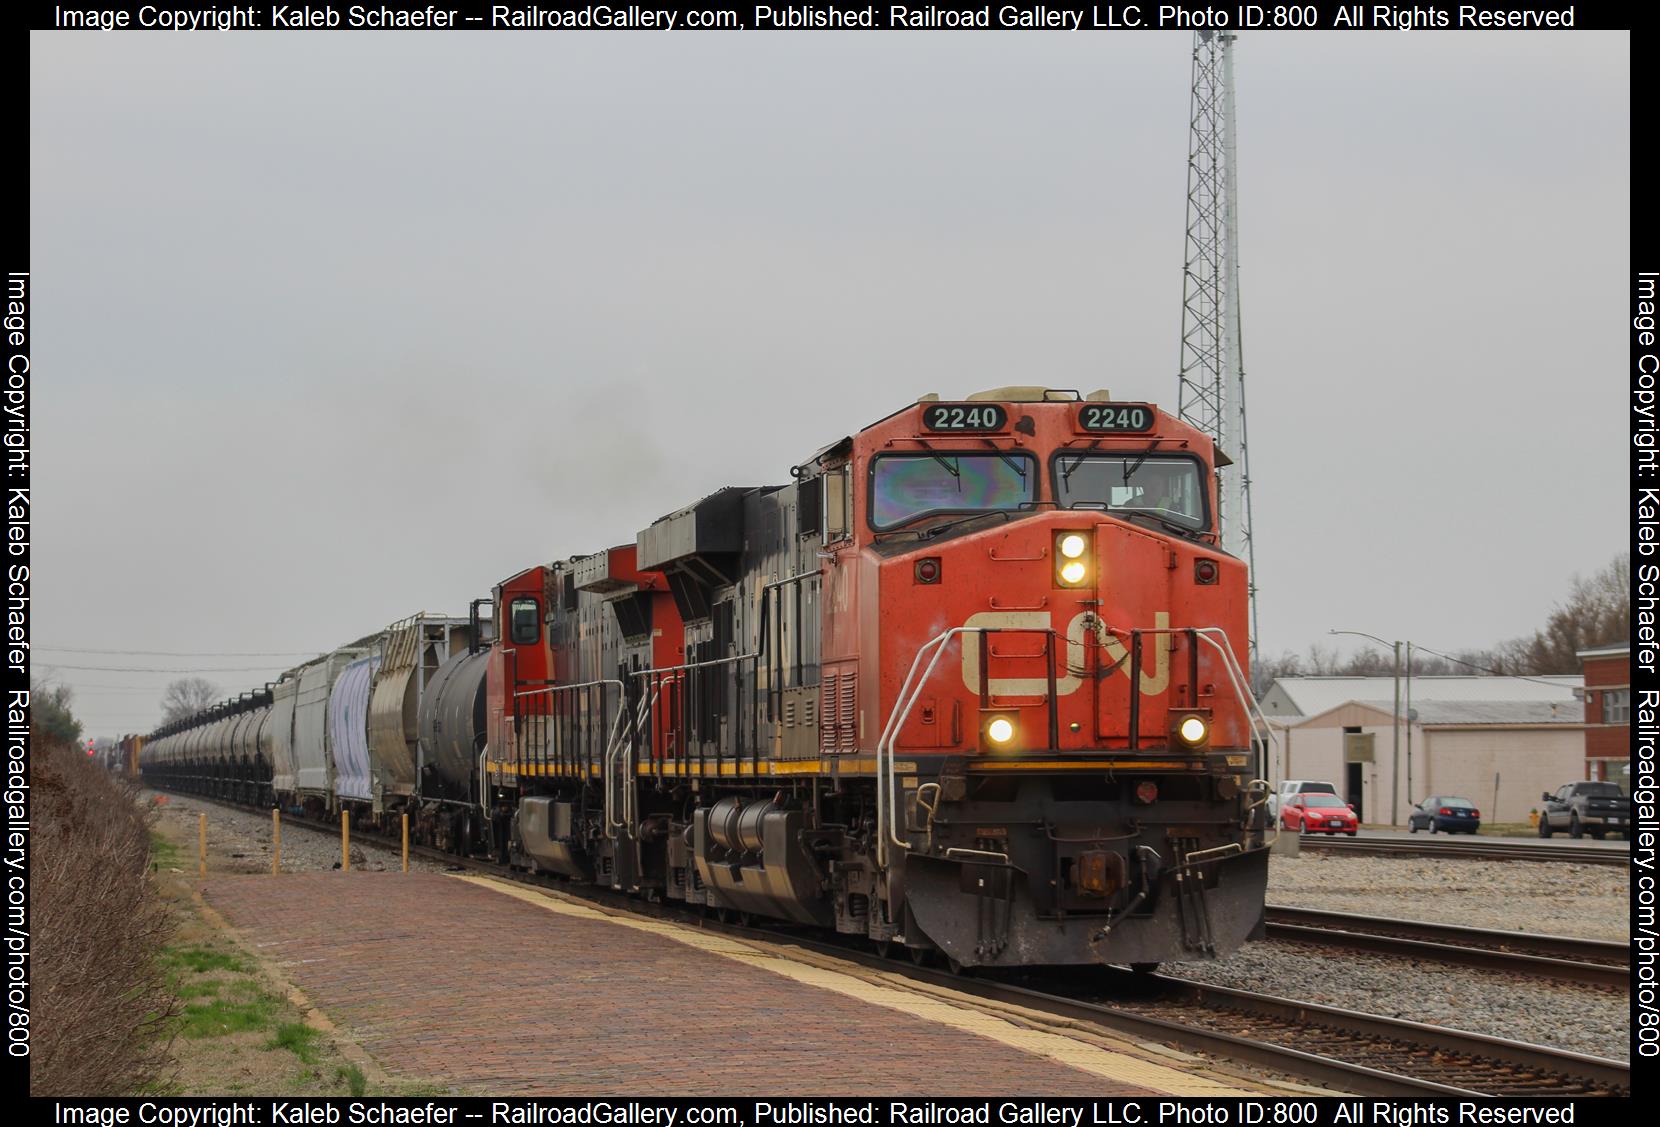 2240 is a class ES44DC and  is pictured in Centralia , Illinois, USA.  This was taken along the CN Centralia subdivision  on the Canadian National Railway. Photo Copyright: Kaleb Schaefer uploaded to Railroad Gallery on 03/03/2023. This photograph of 2240 was taken on Wednesday, March 01, 2023. All Rights Reserved. 